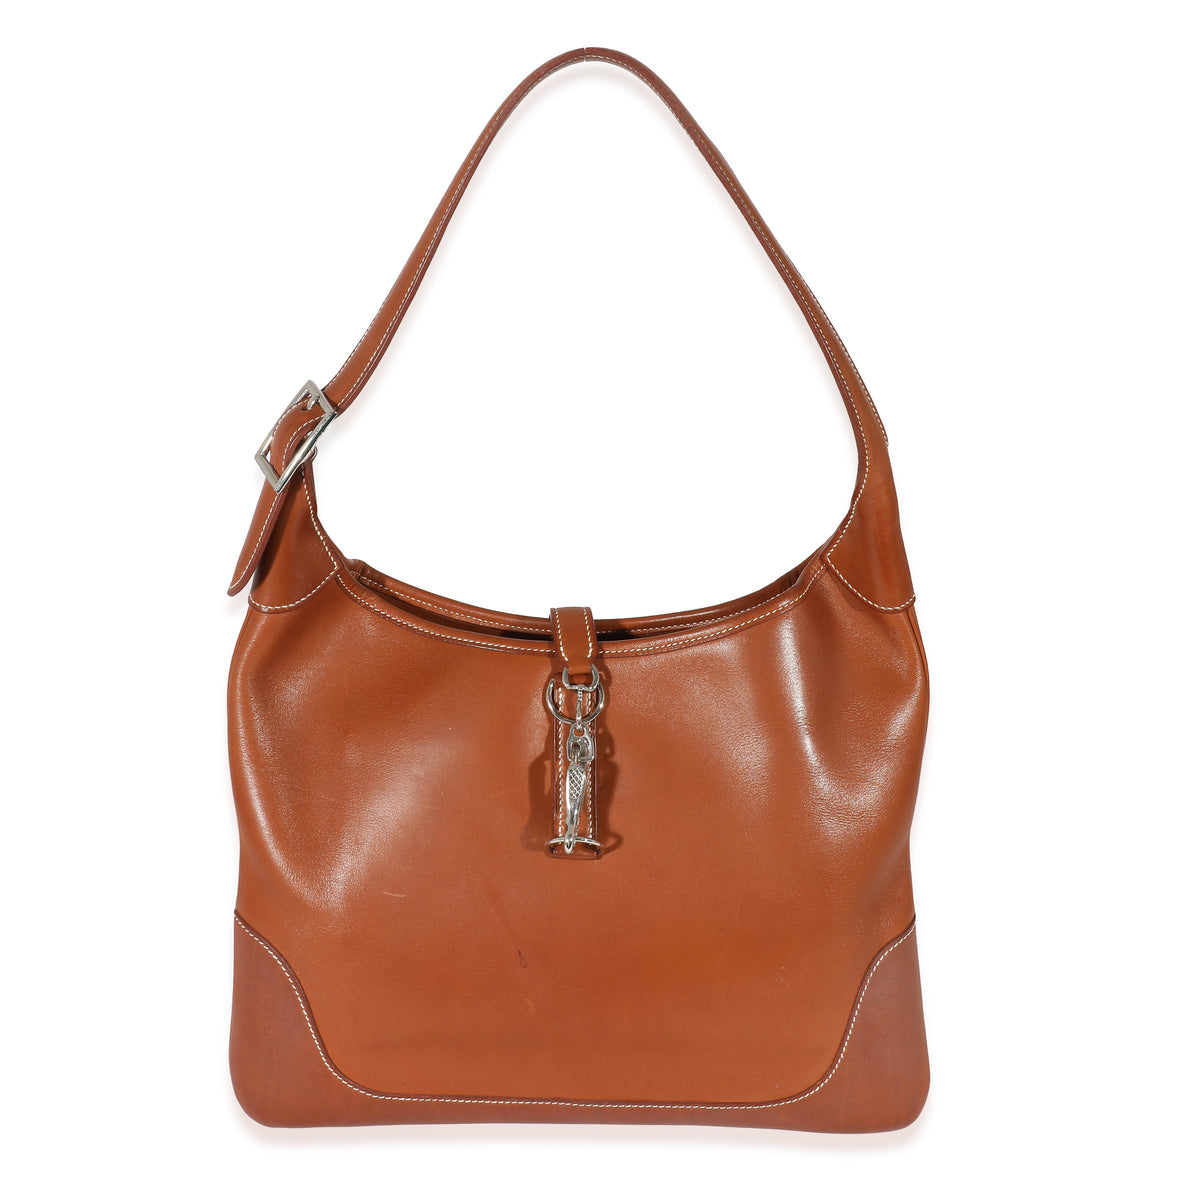 We are looking for Hermès barenia bags